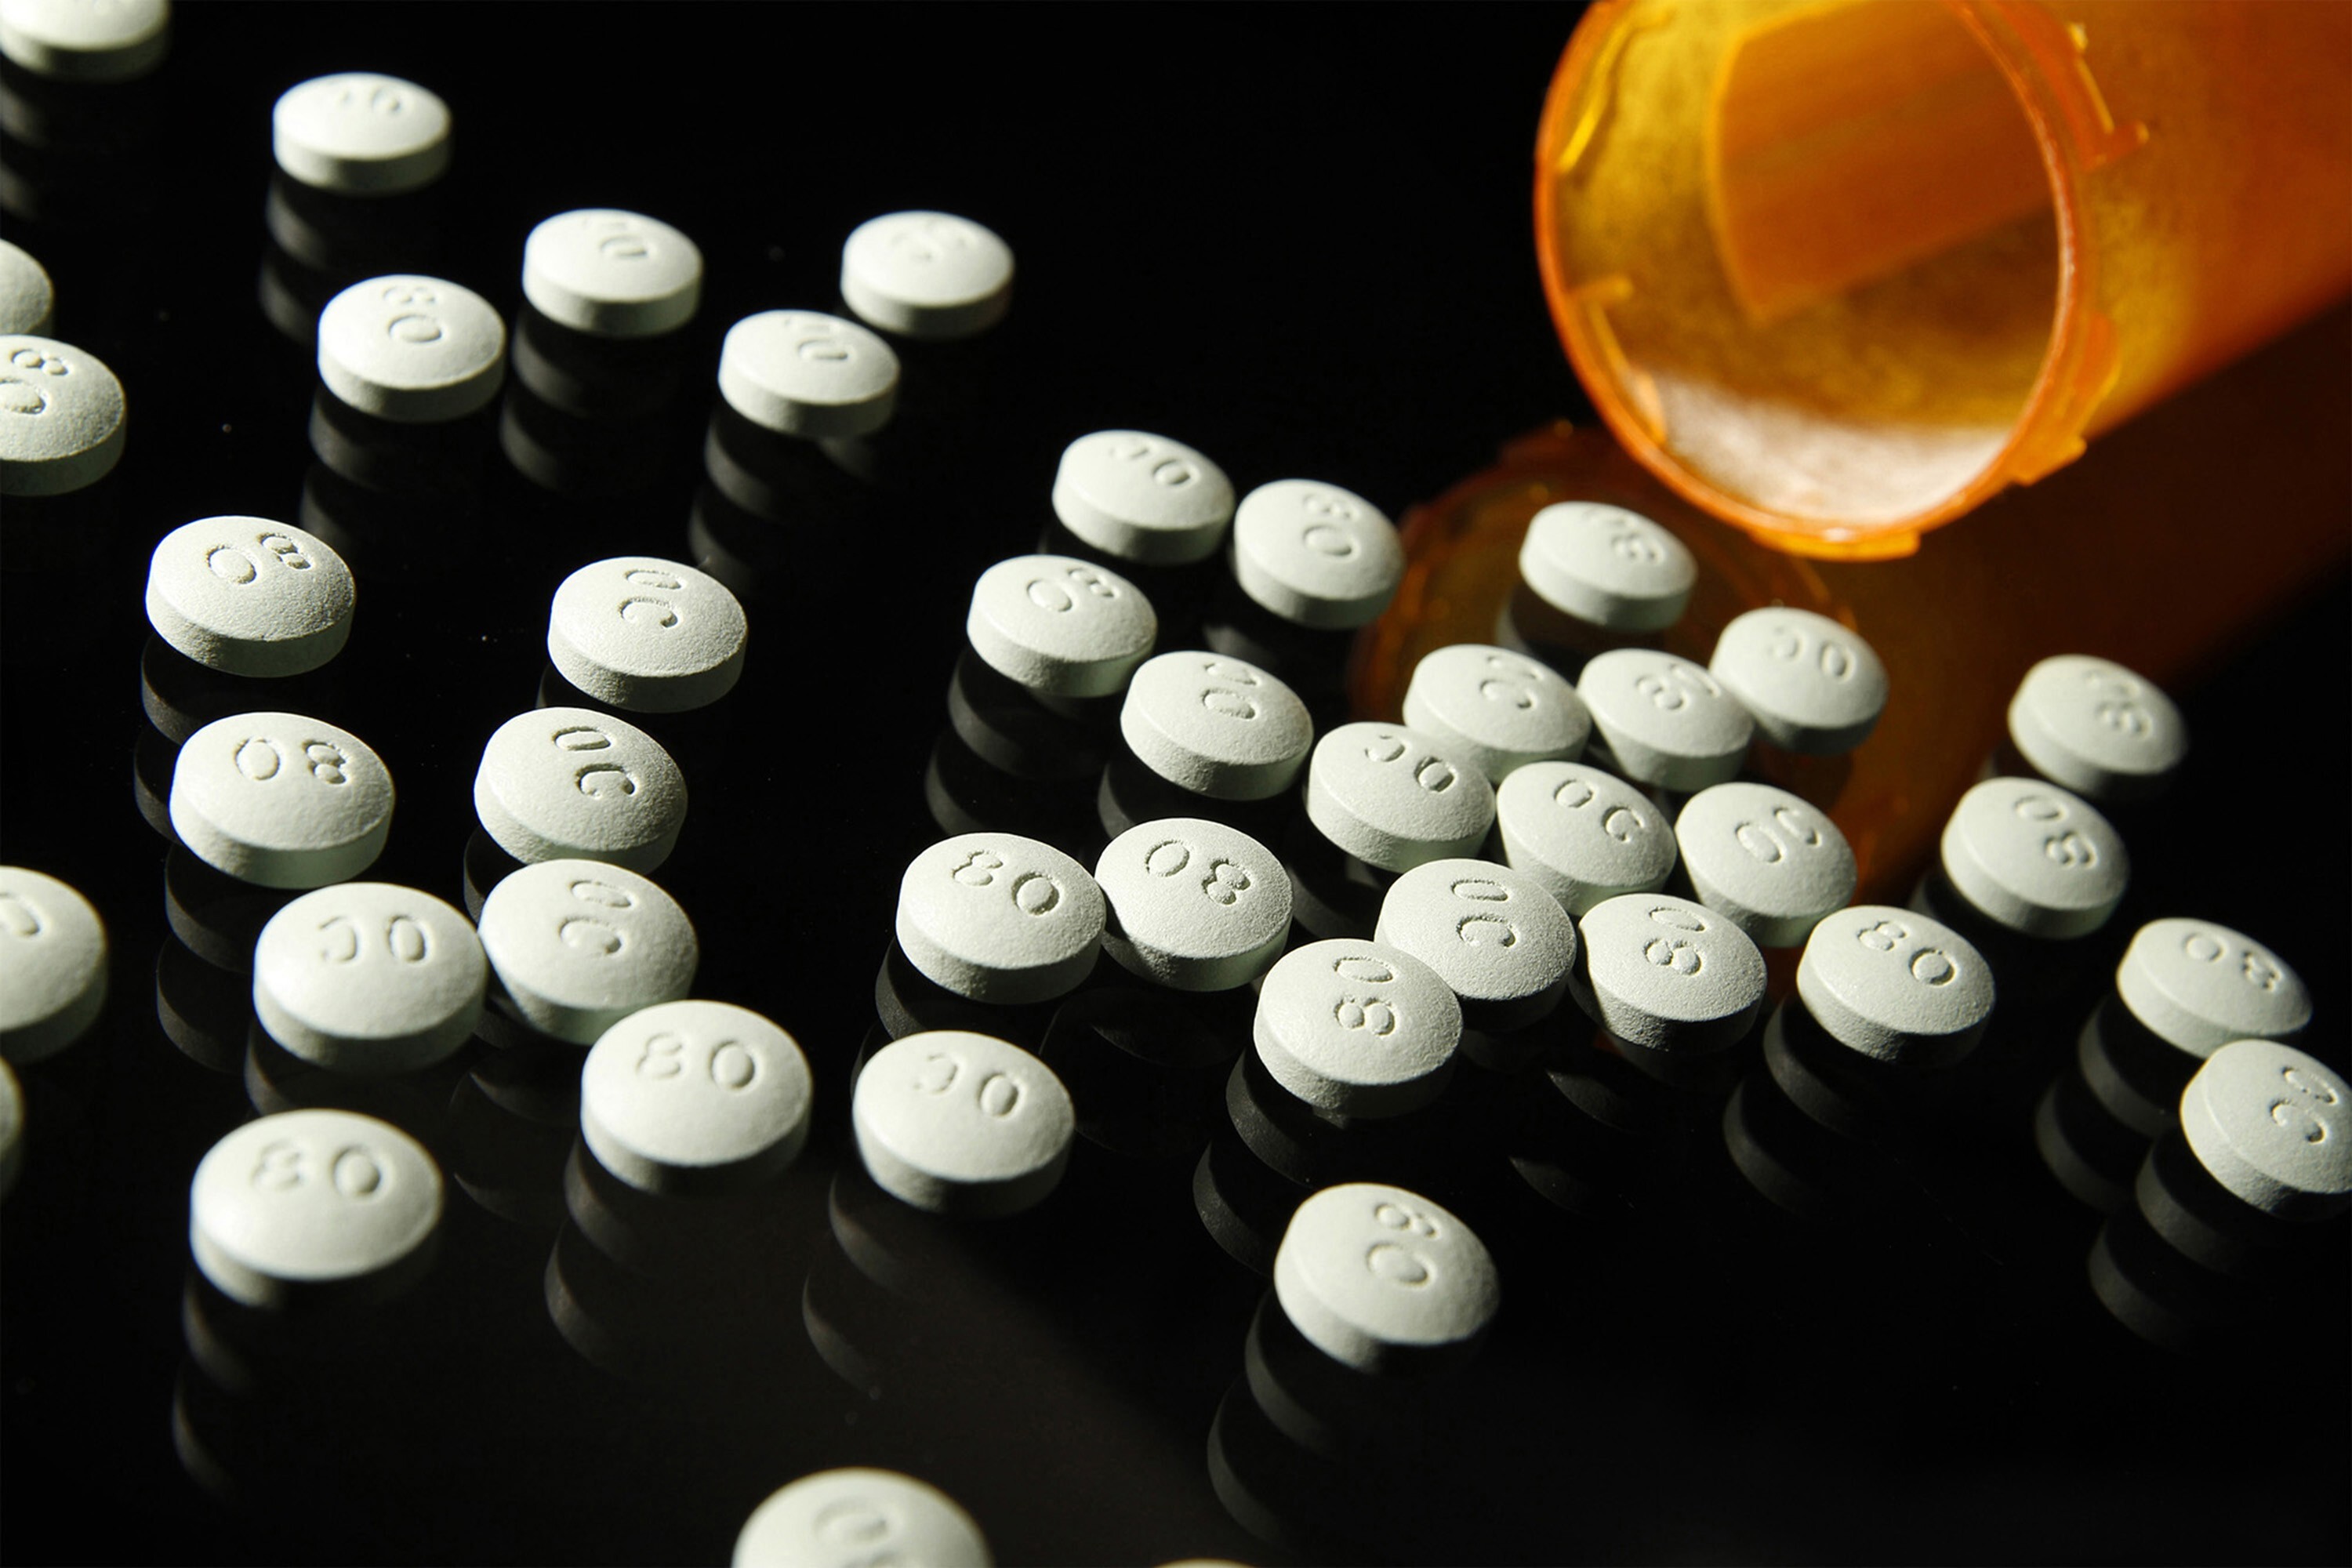 The settlement is likely to boost Purdue’s effort to move past claims it helped spark a public-health crisis over opioids with its marketing of OxyContin. Photo: TNS